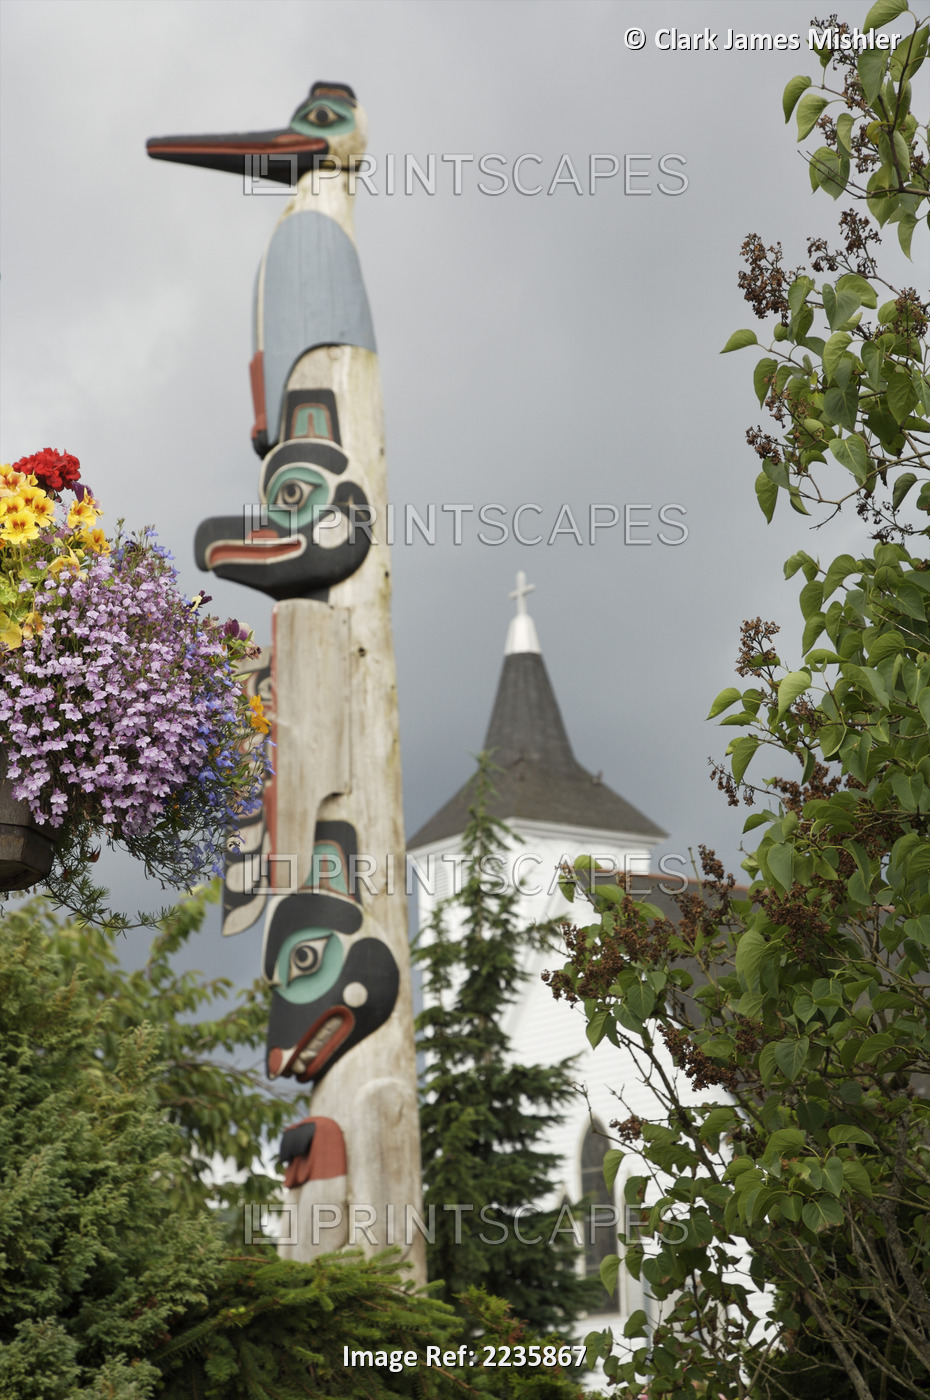 View Of A Totempole In Downtown Ketchikan, Alaska